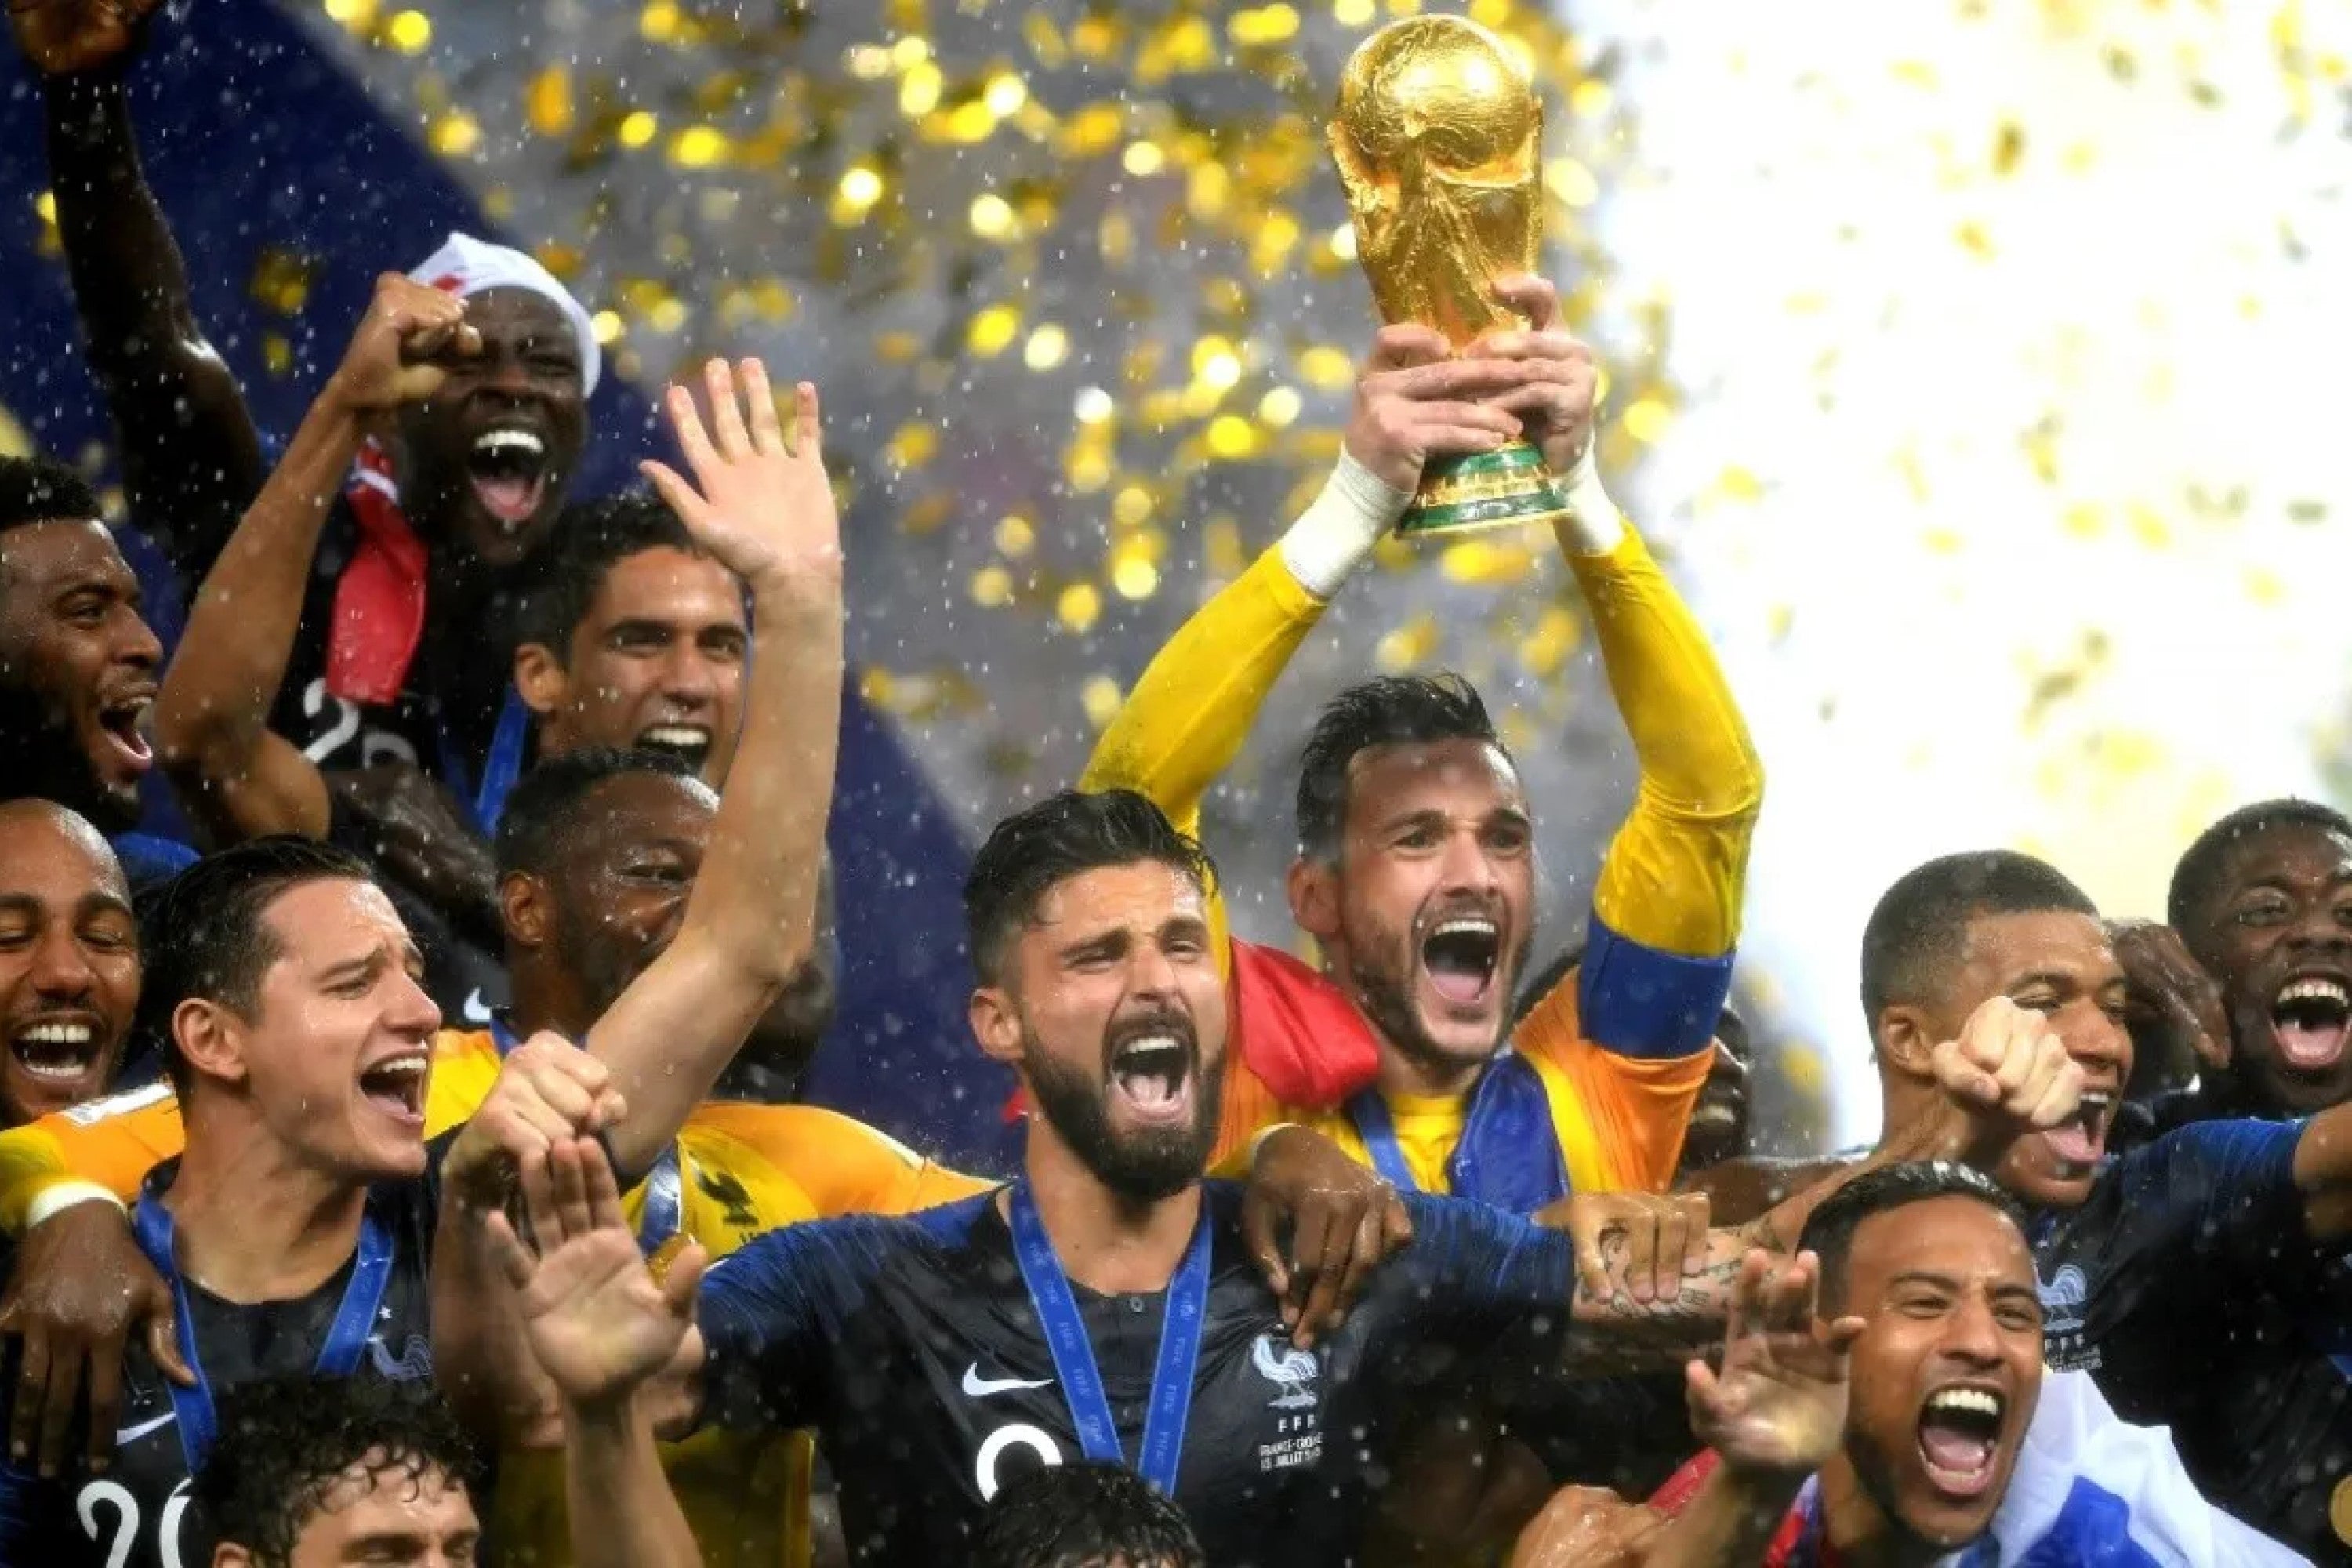 France will look to defend their title at the FIFA World Cup 2022 in Qatar